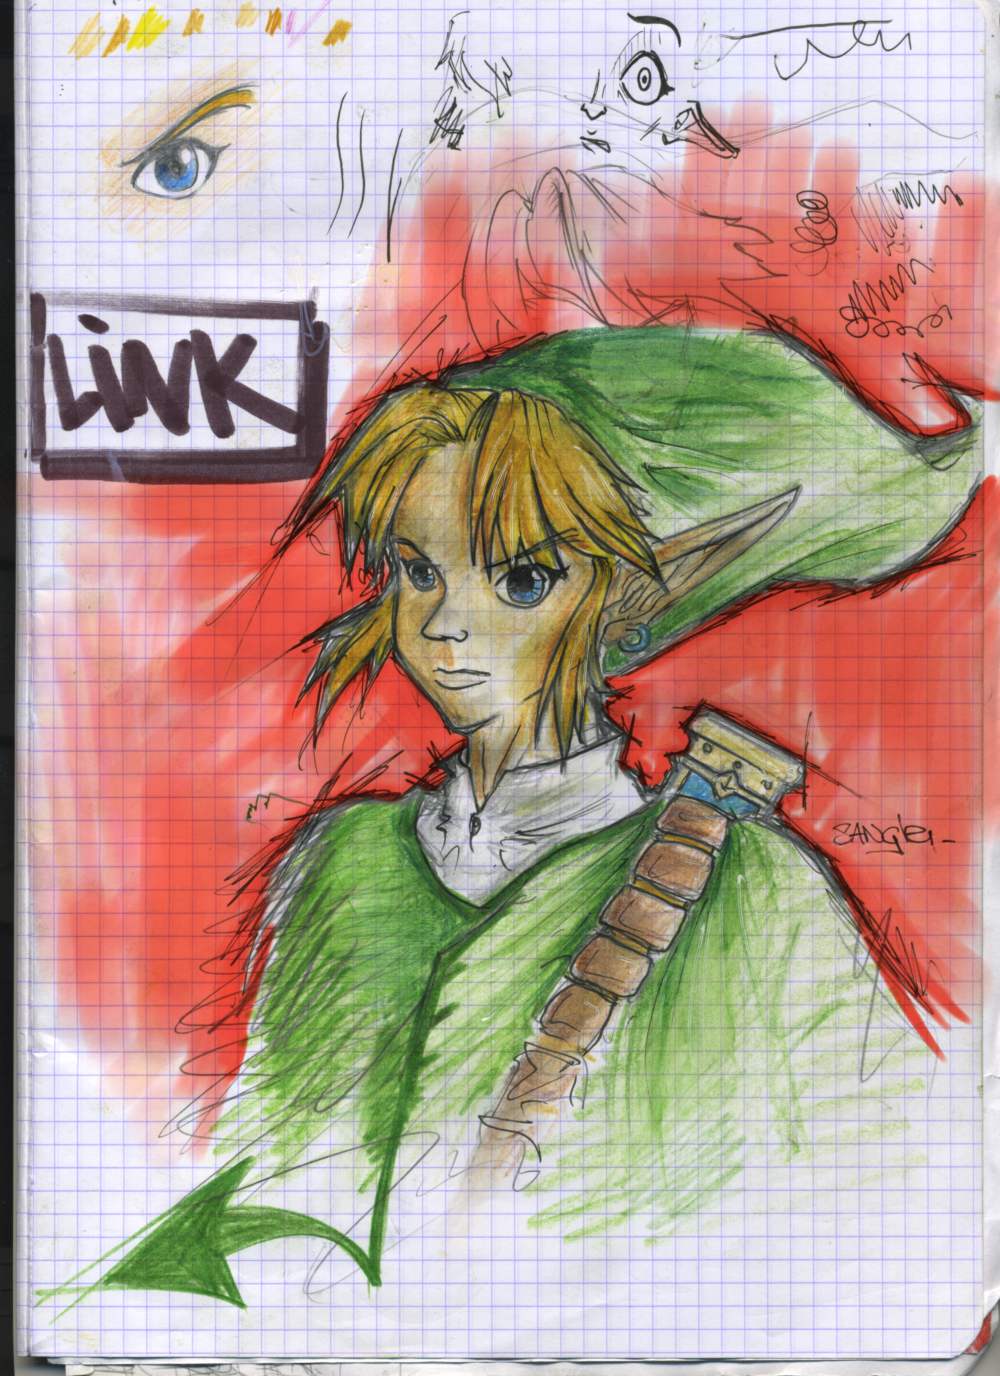 Link by sangle